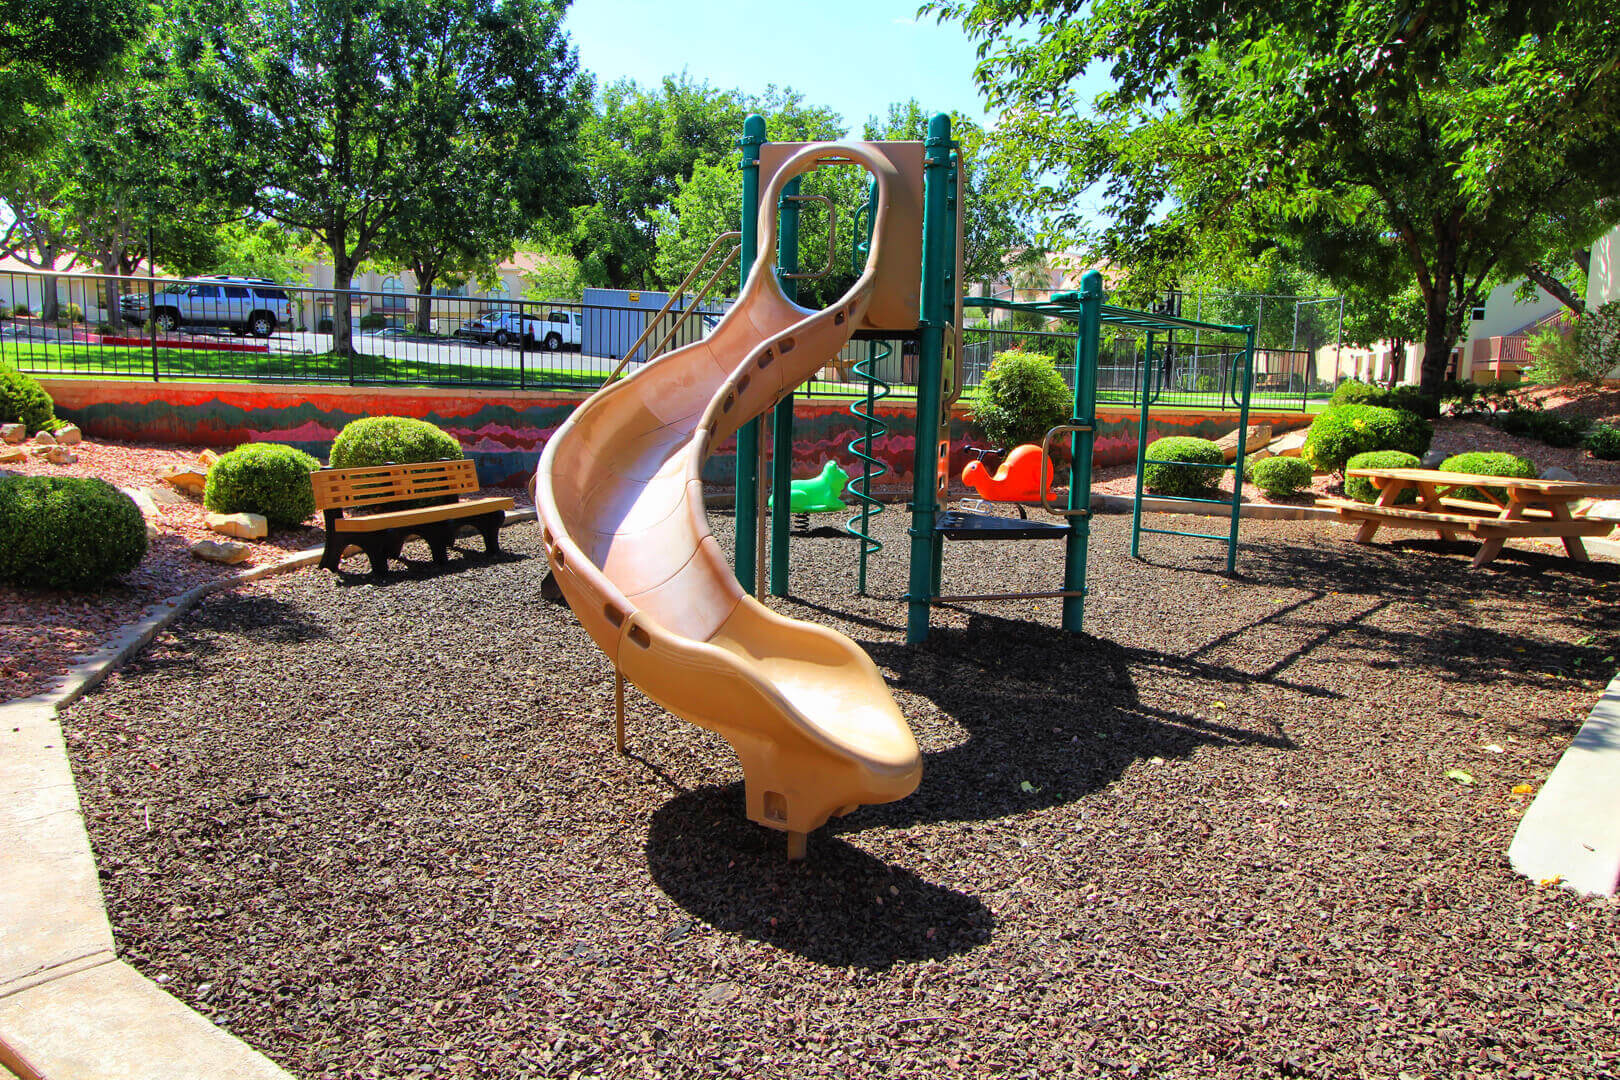 An outdoor playground at VRI's Villas at South Gate in St. George, Utah.